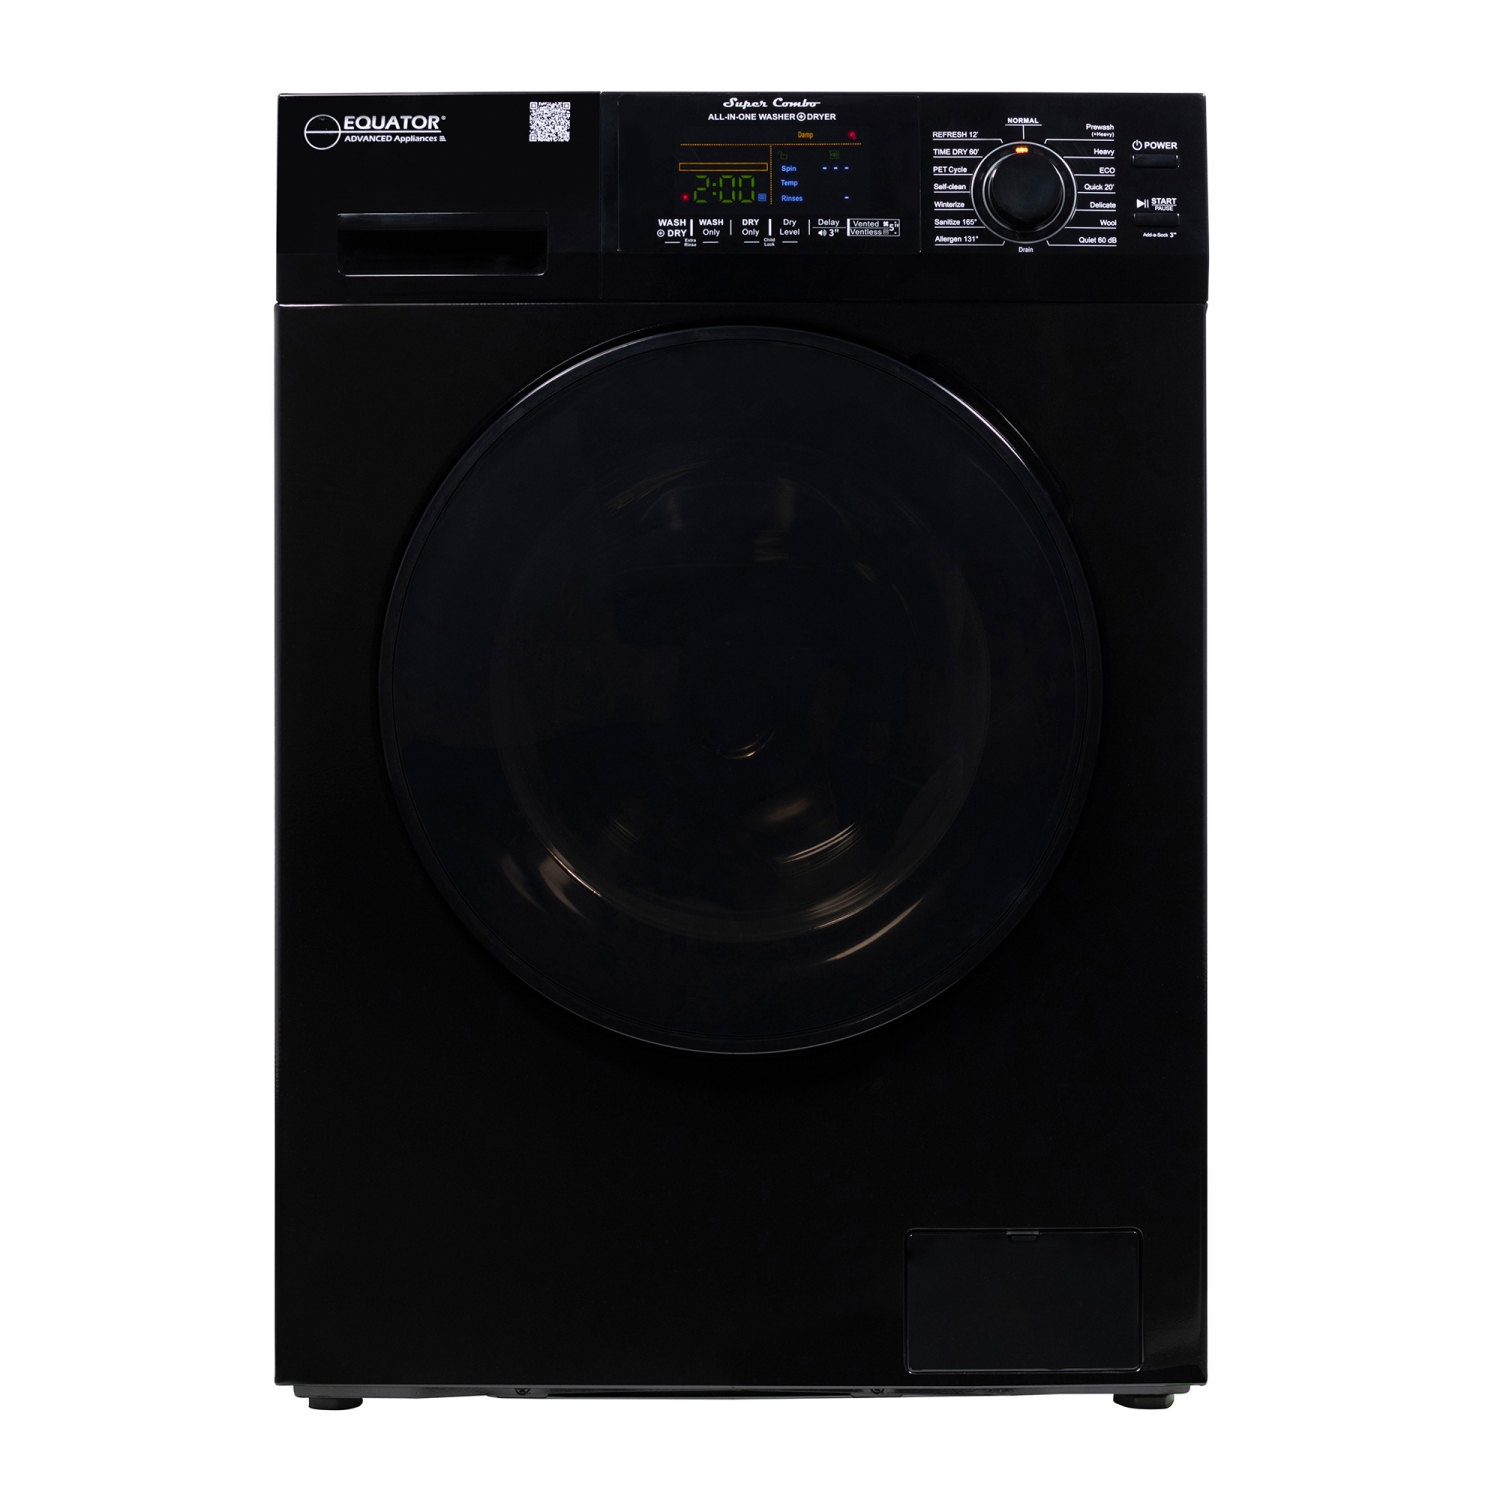 Equator All-in-One Washer Dryer VENTLESS/VENTED PET cycle 1.62cf/15lbs 110V in Black